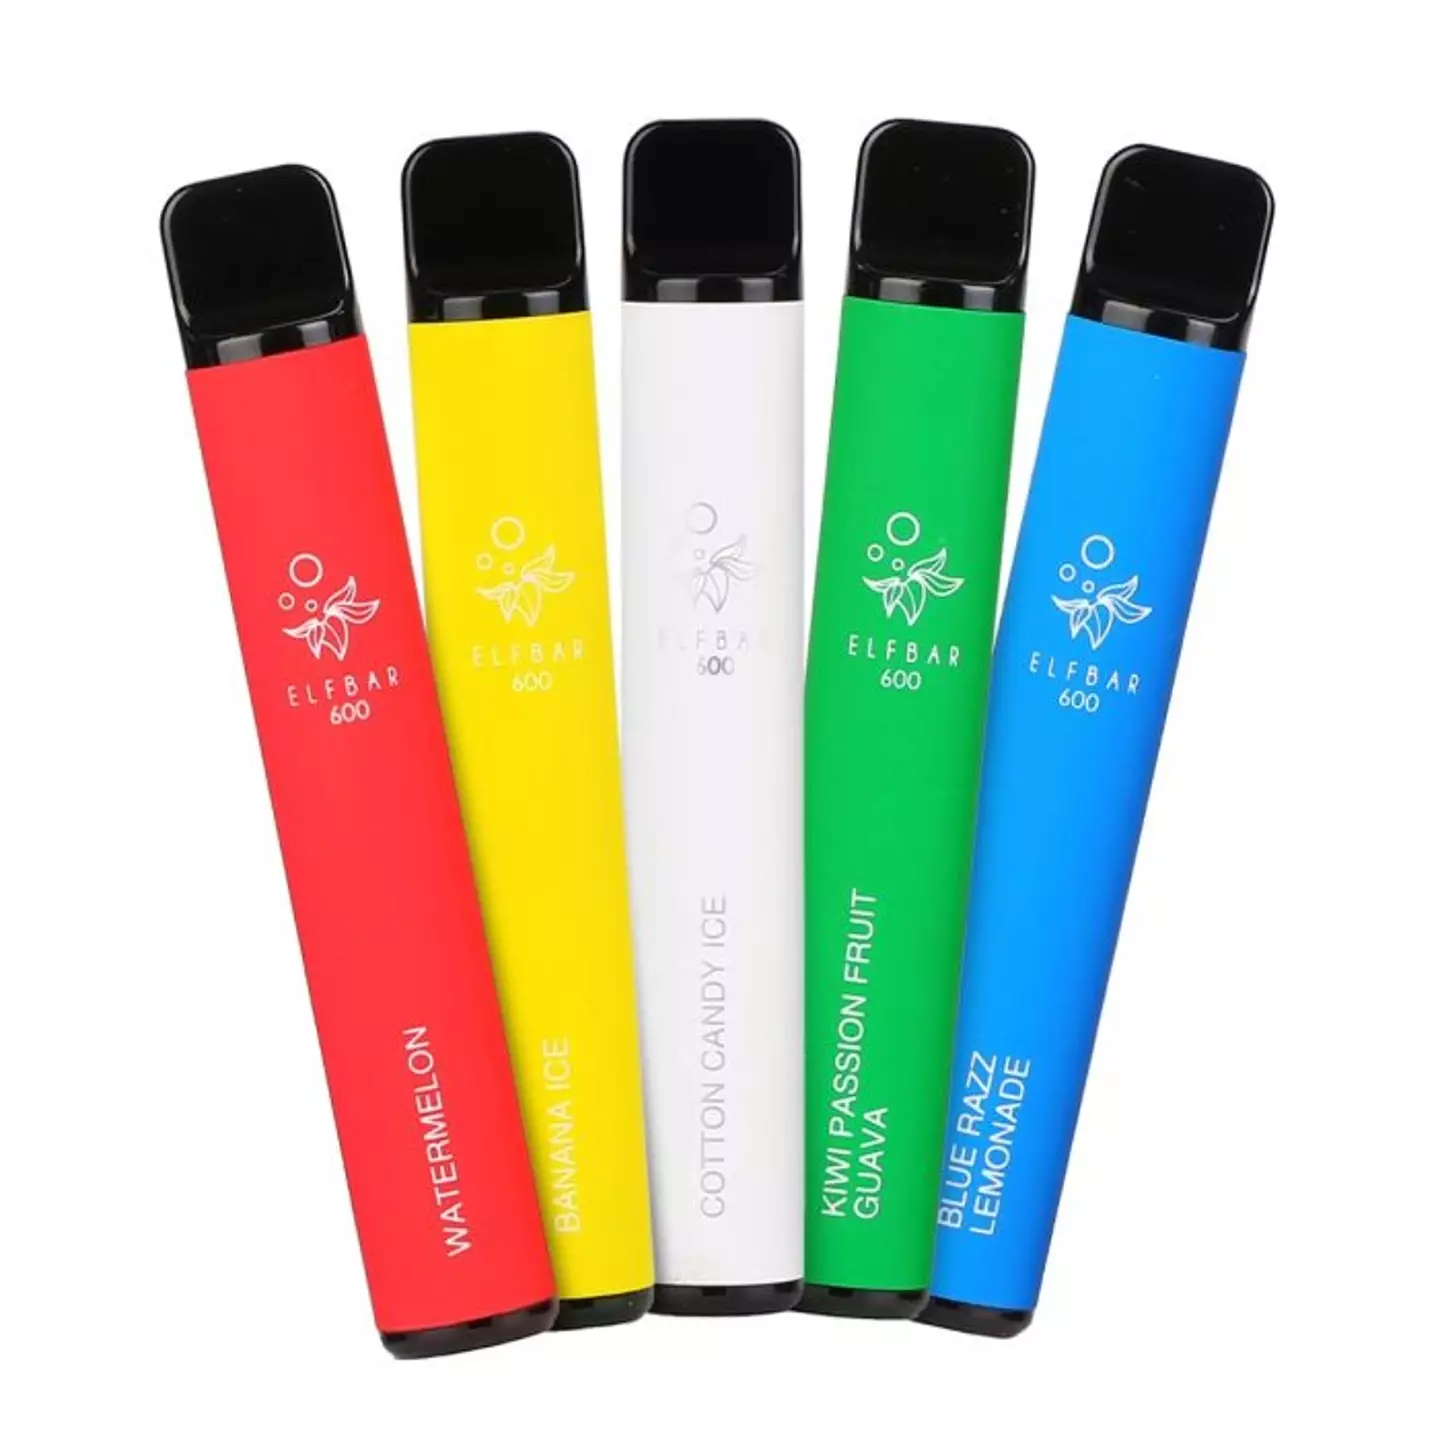 Elf Bar is the most popular disposable vape brand in the UK.